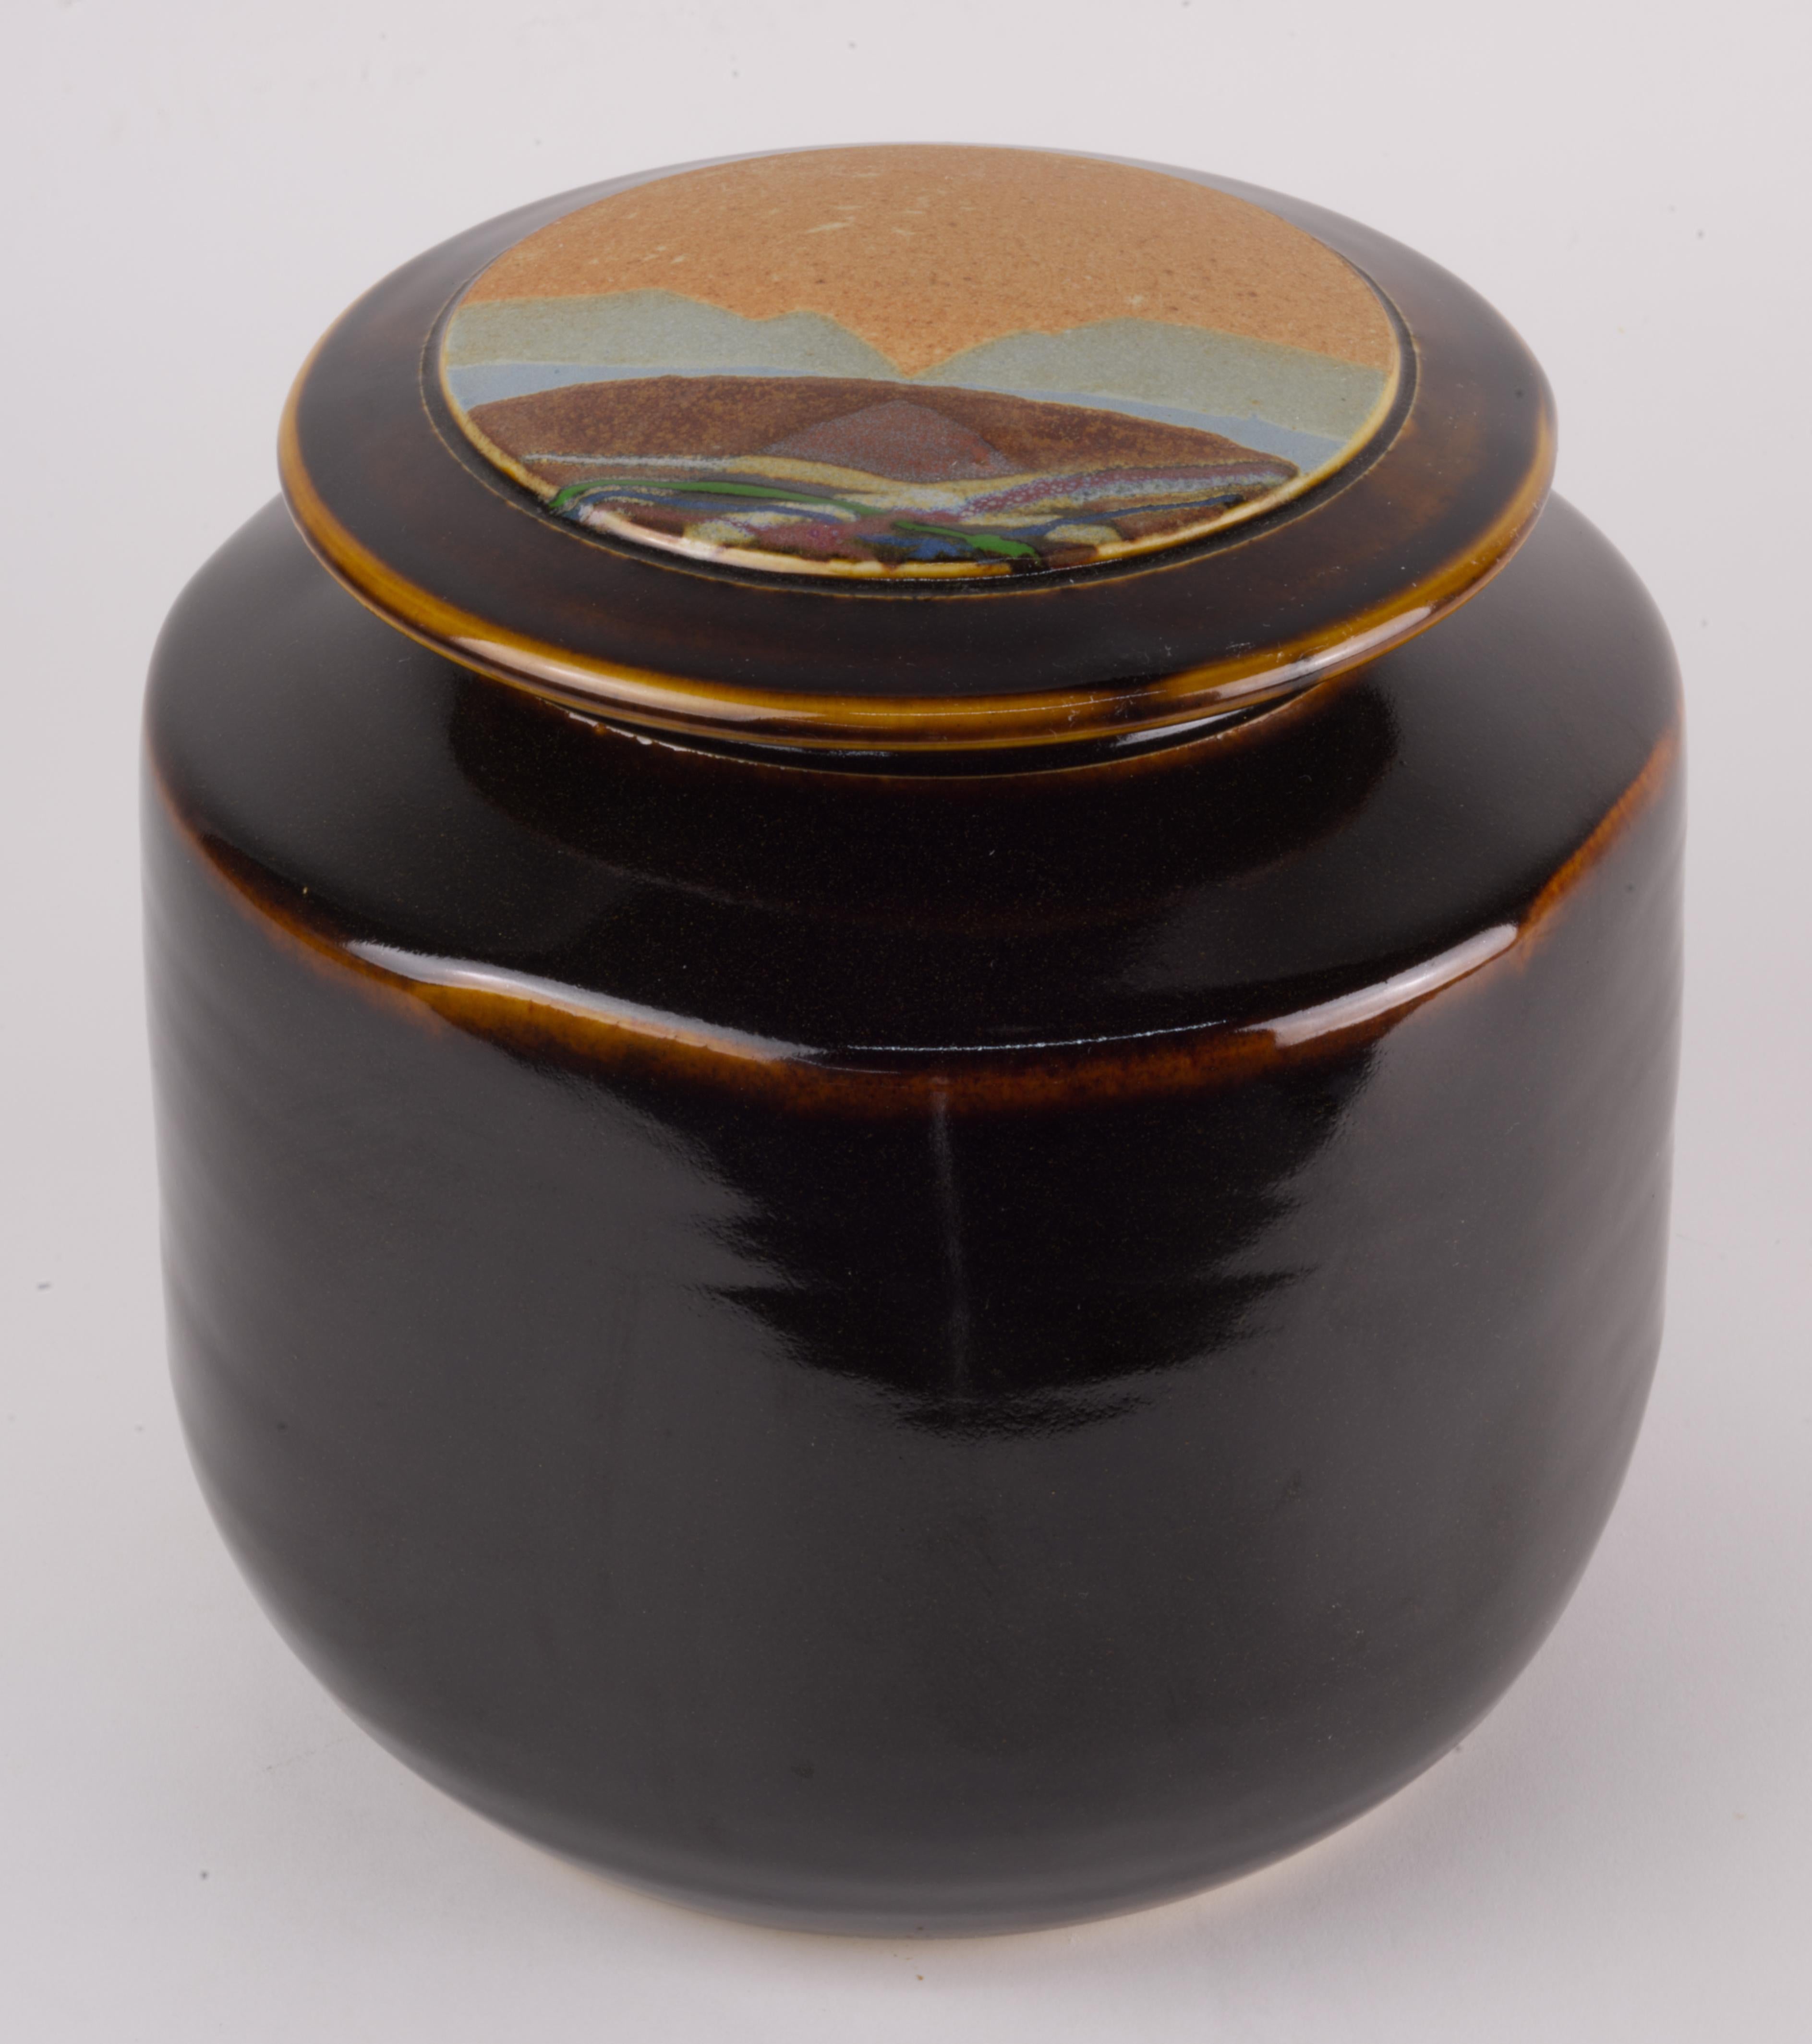  Covered vessel or jar was handmade in white clay by Rob Wiedmaier of River Hills Pottery as a part of a series done in 1980s. The lid of the vessel is decorated with abstract landscape design done in complex mix of multicolored, textured matte and